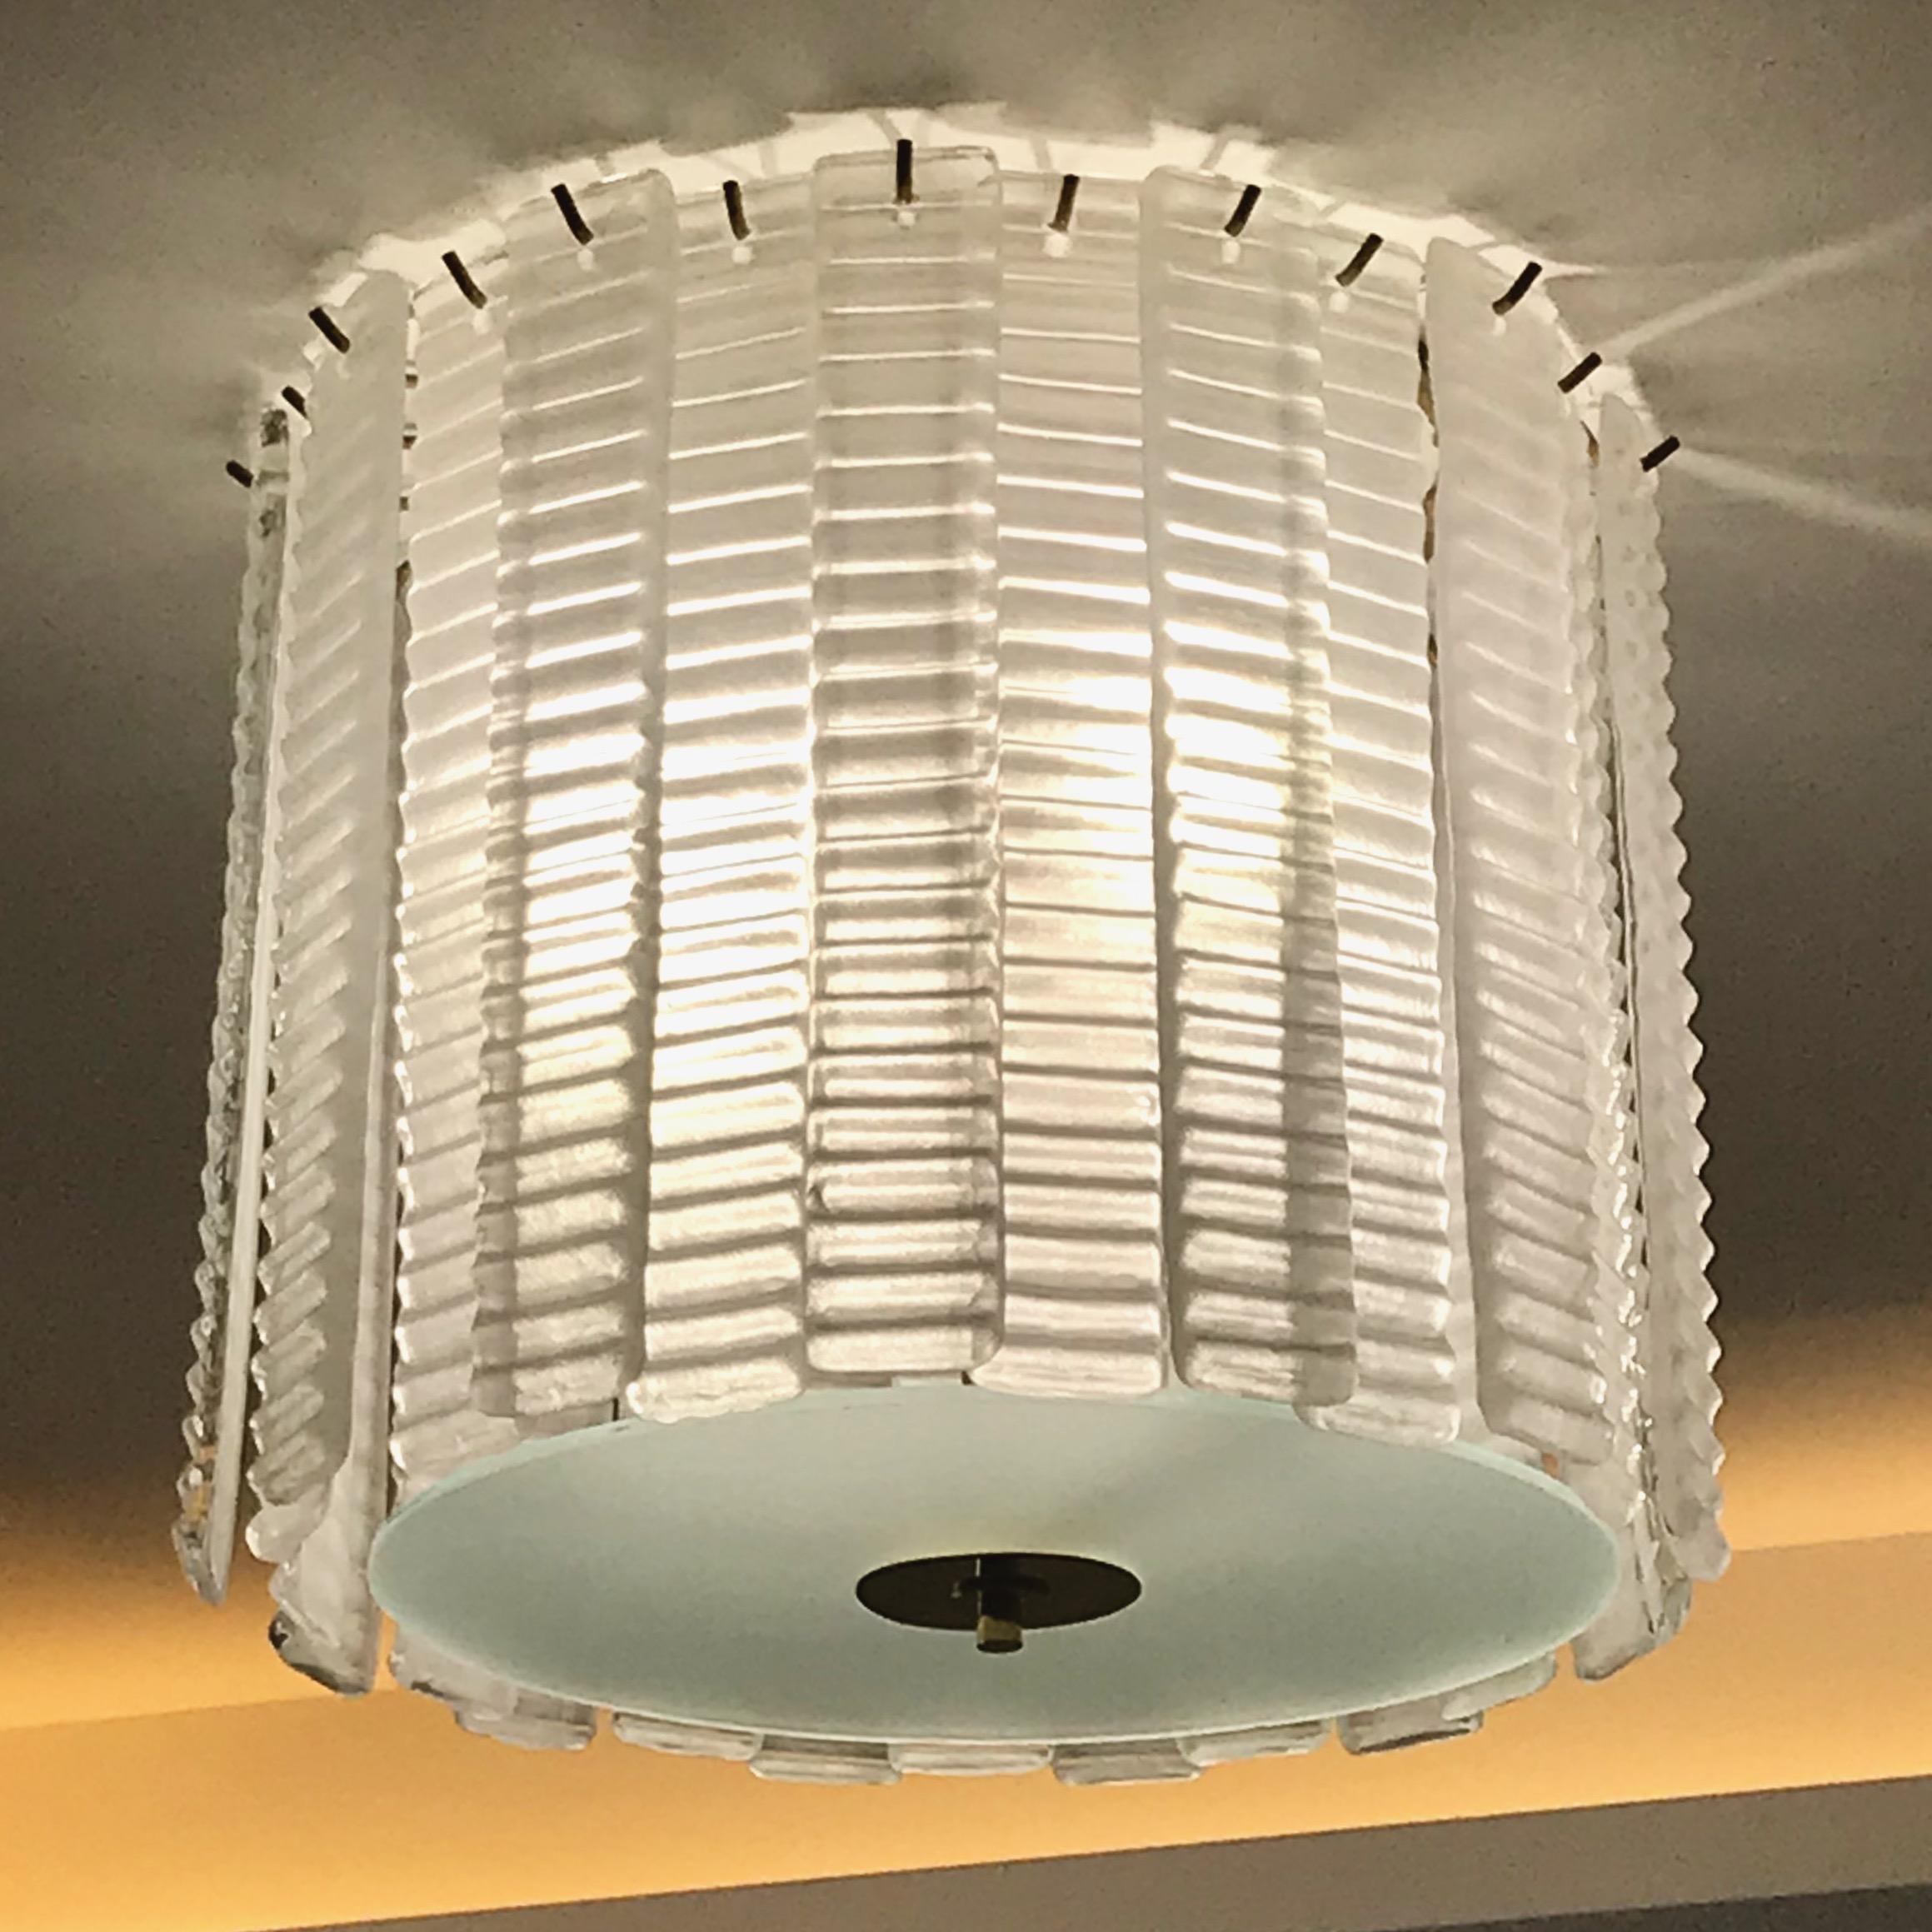 Cosulich Interiors custom design bespoke light fixture in frosted crystal clear Murano glass, composed of straight strings with a sensual wavy pattern enclosing a glass circle with brass finial in frosted glass to diffuse the light source. The